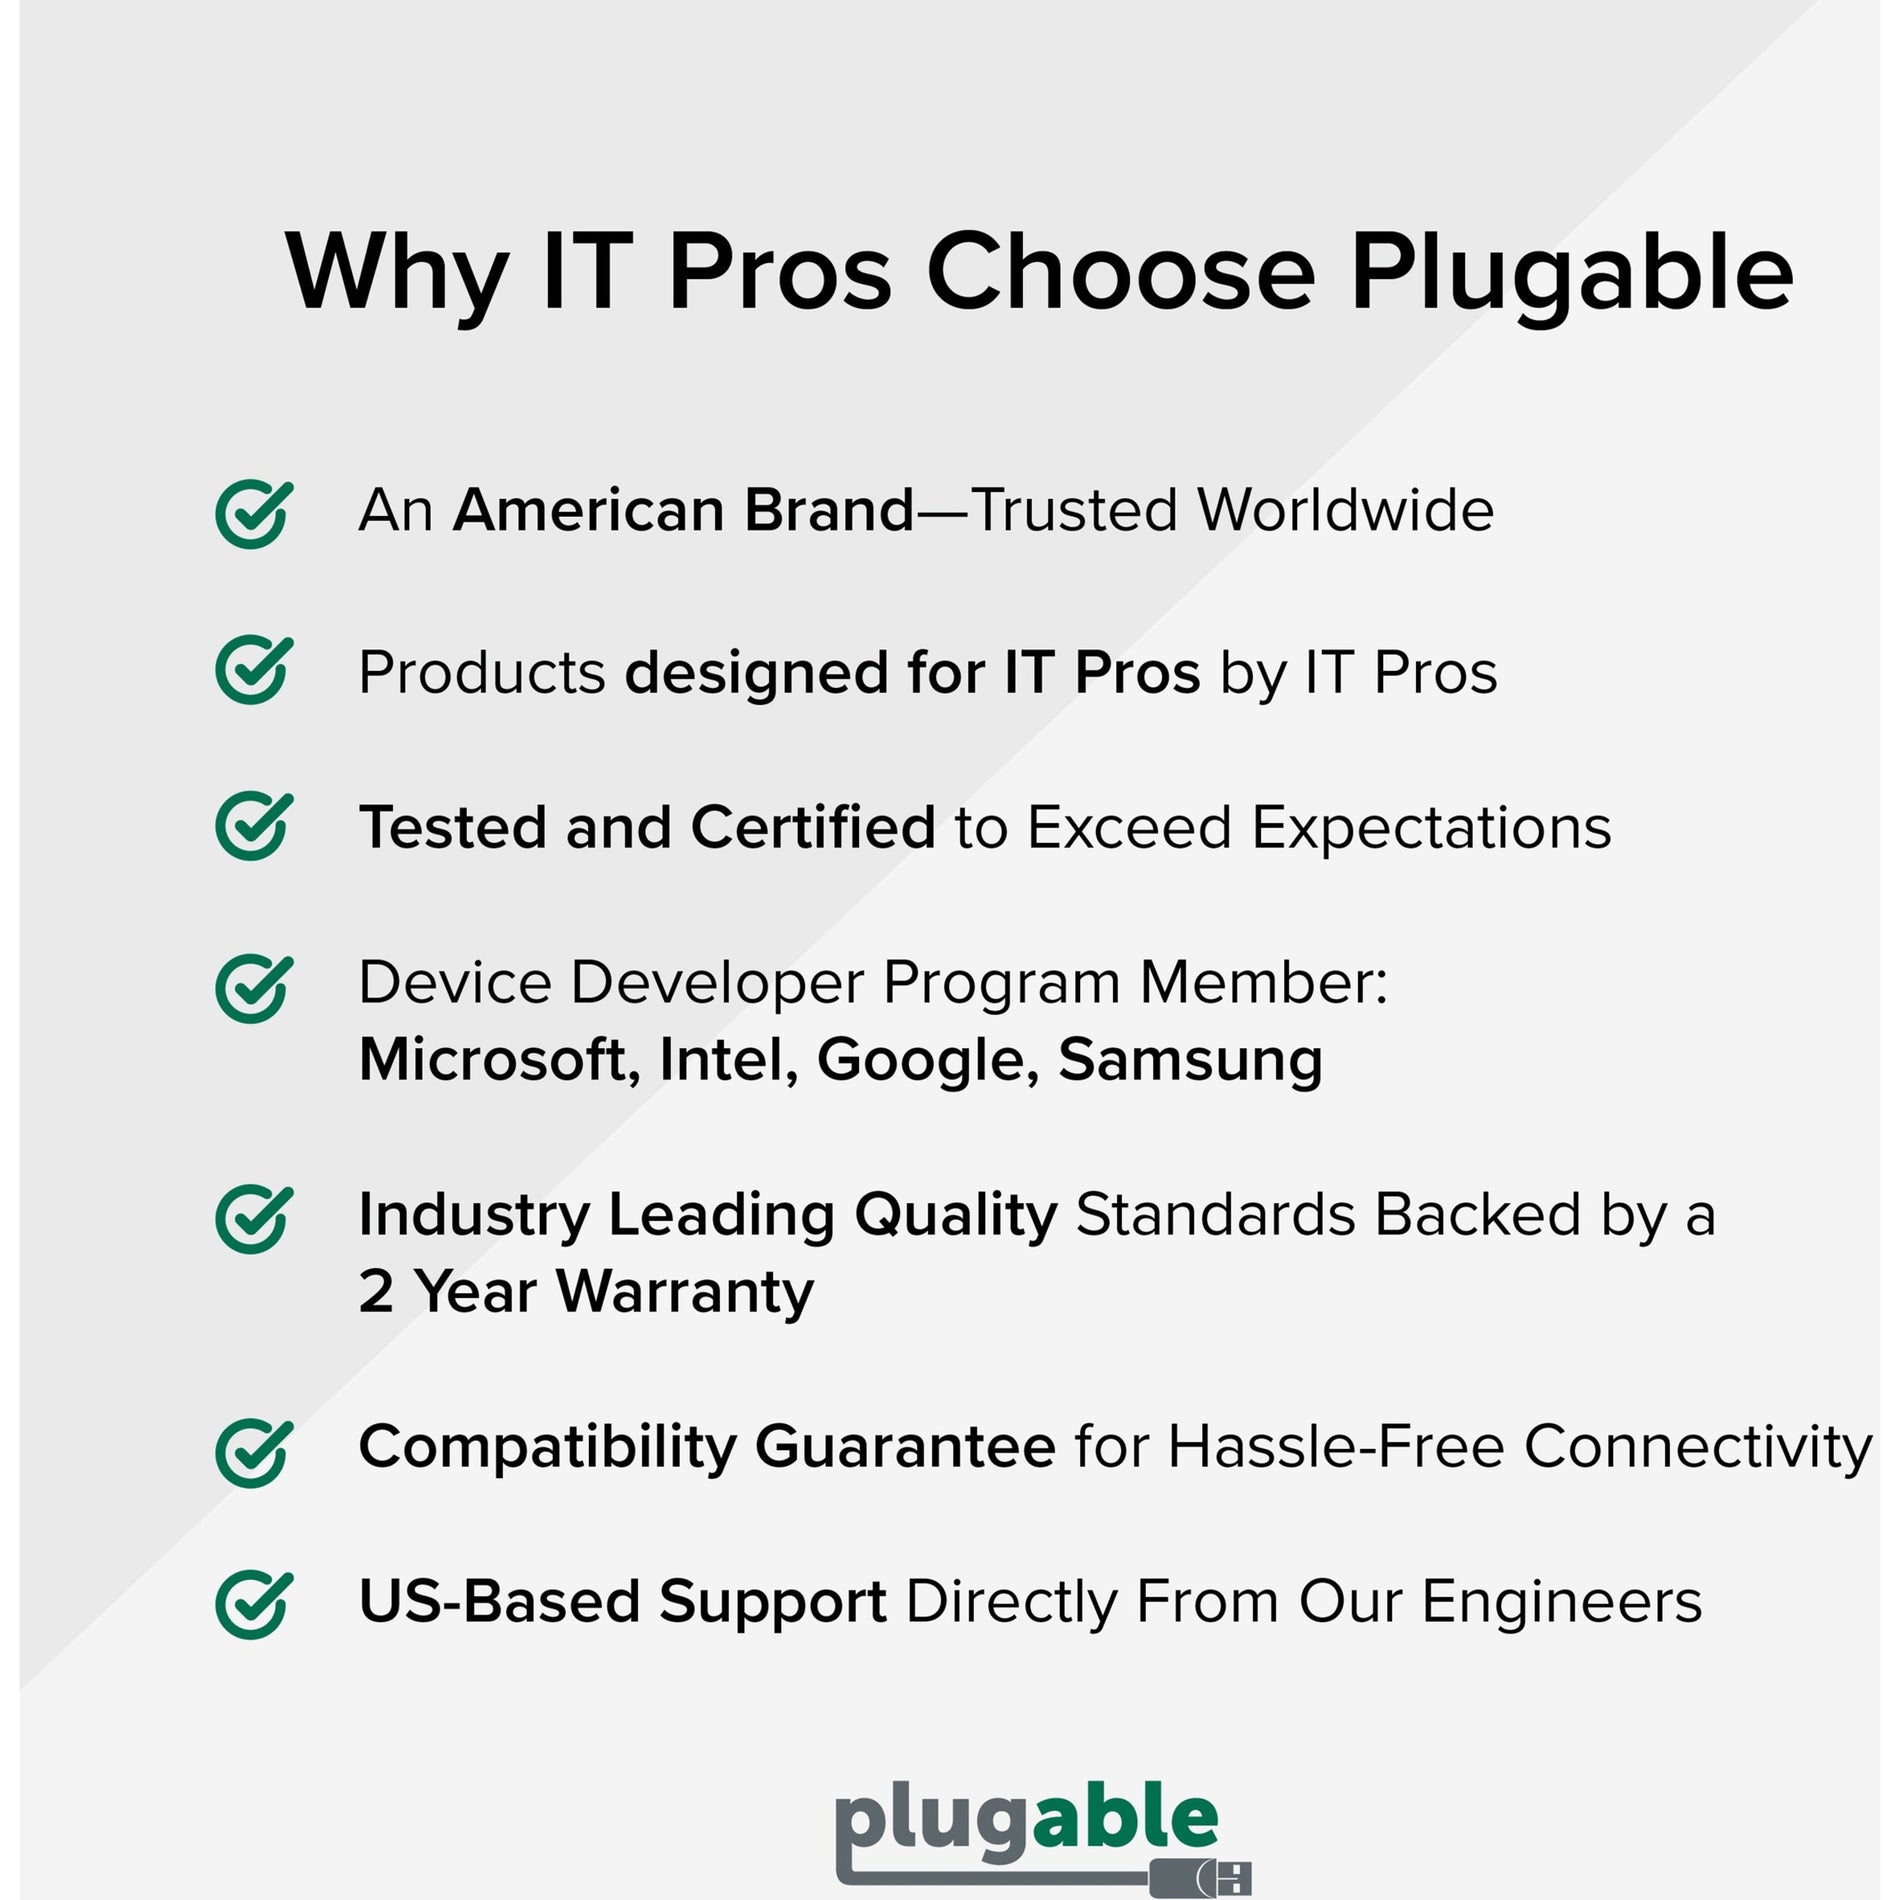 Plugable USBC-6950UE USB Type-C Dual 4K HDMI and Gigabit Ethernet Adapter, Connect Two Monitors and Ethernet to Your USB-C Device